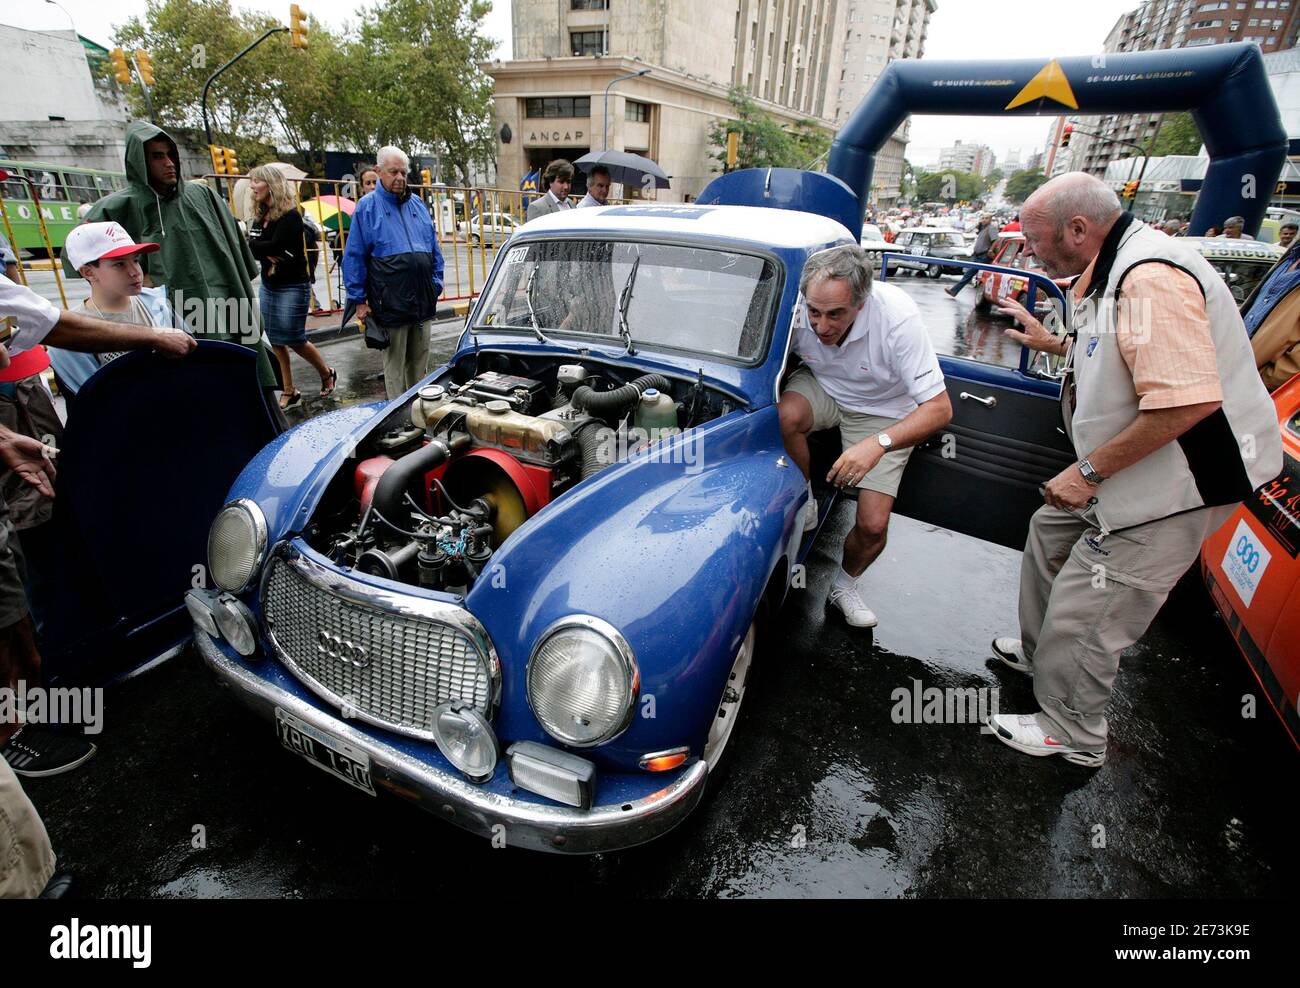 The engine of a classic DKW is checked before the start of the 'Gran Premio del Uruguay, 19 capitales historico' (Uruguayan great prize, 19 capitals) rally in Montevideo March 4, 2009. Only classic cars are allowed to participate in the rally which covers a route of over 2,500 km (1,553 miles) and traverses the 19 capitals of the provinces of the country. REUTERS/Andres Stapff (URUGUAY) Stock Photo